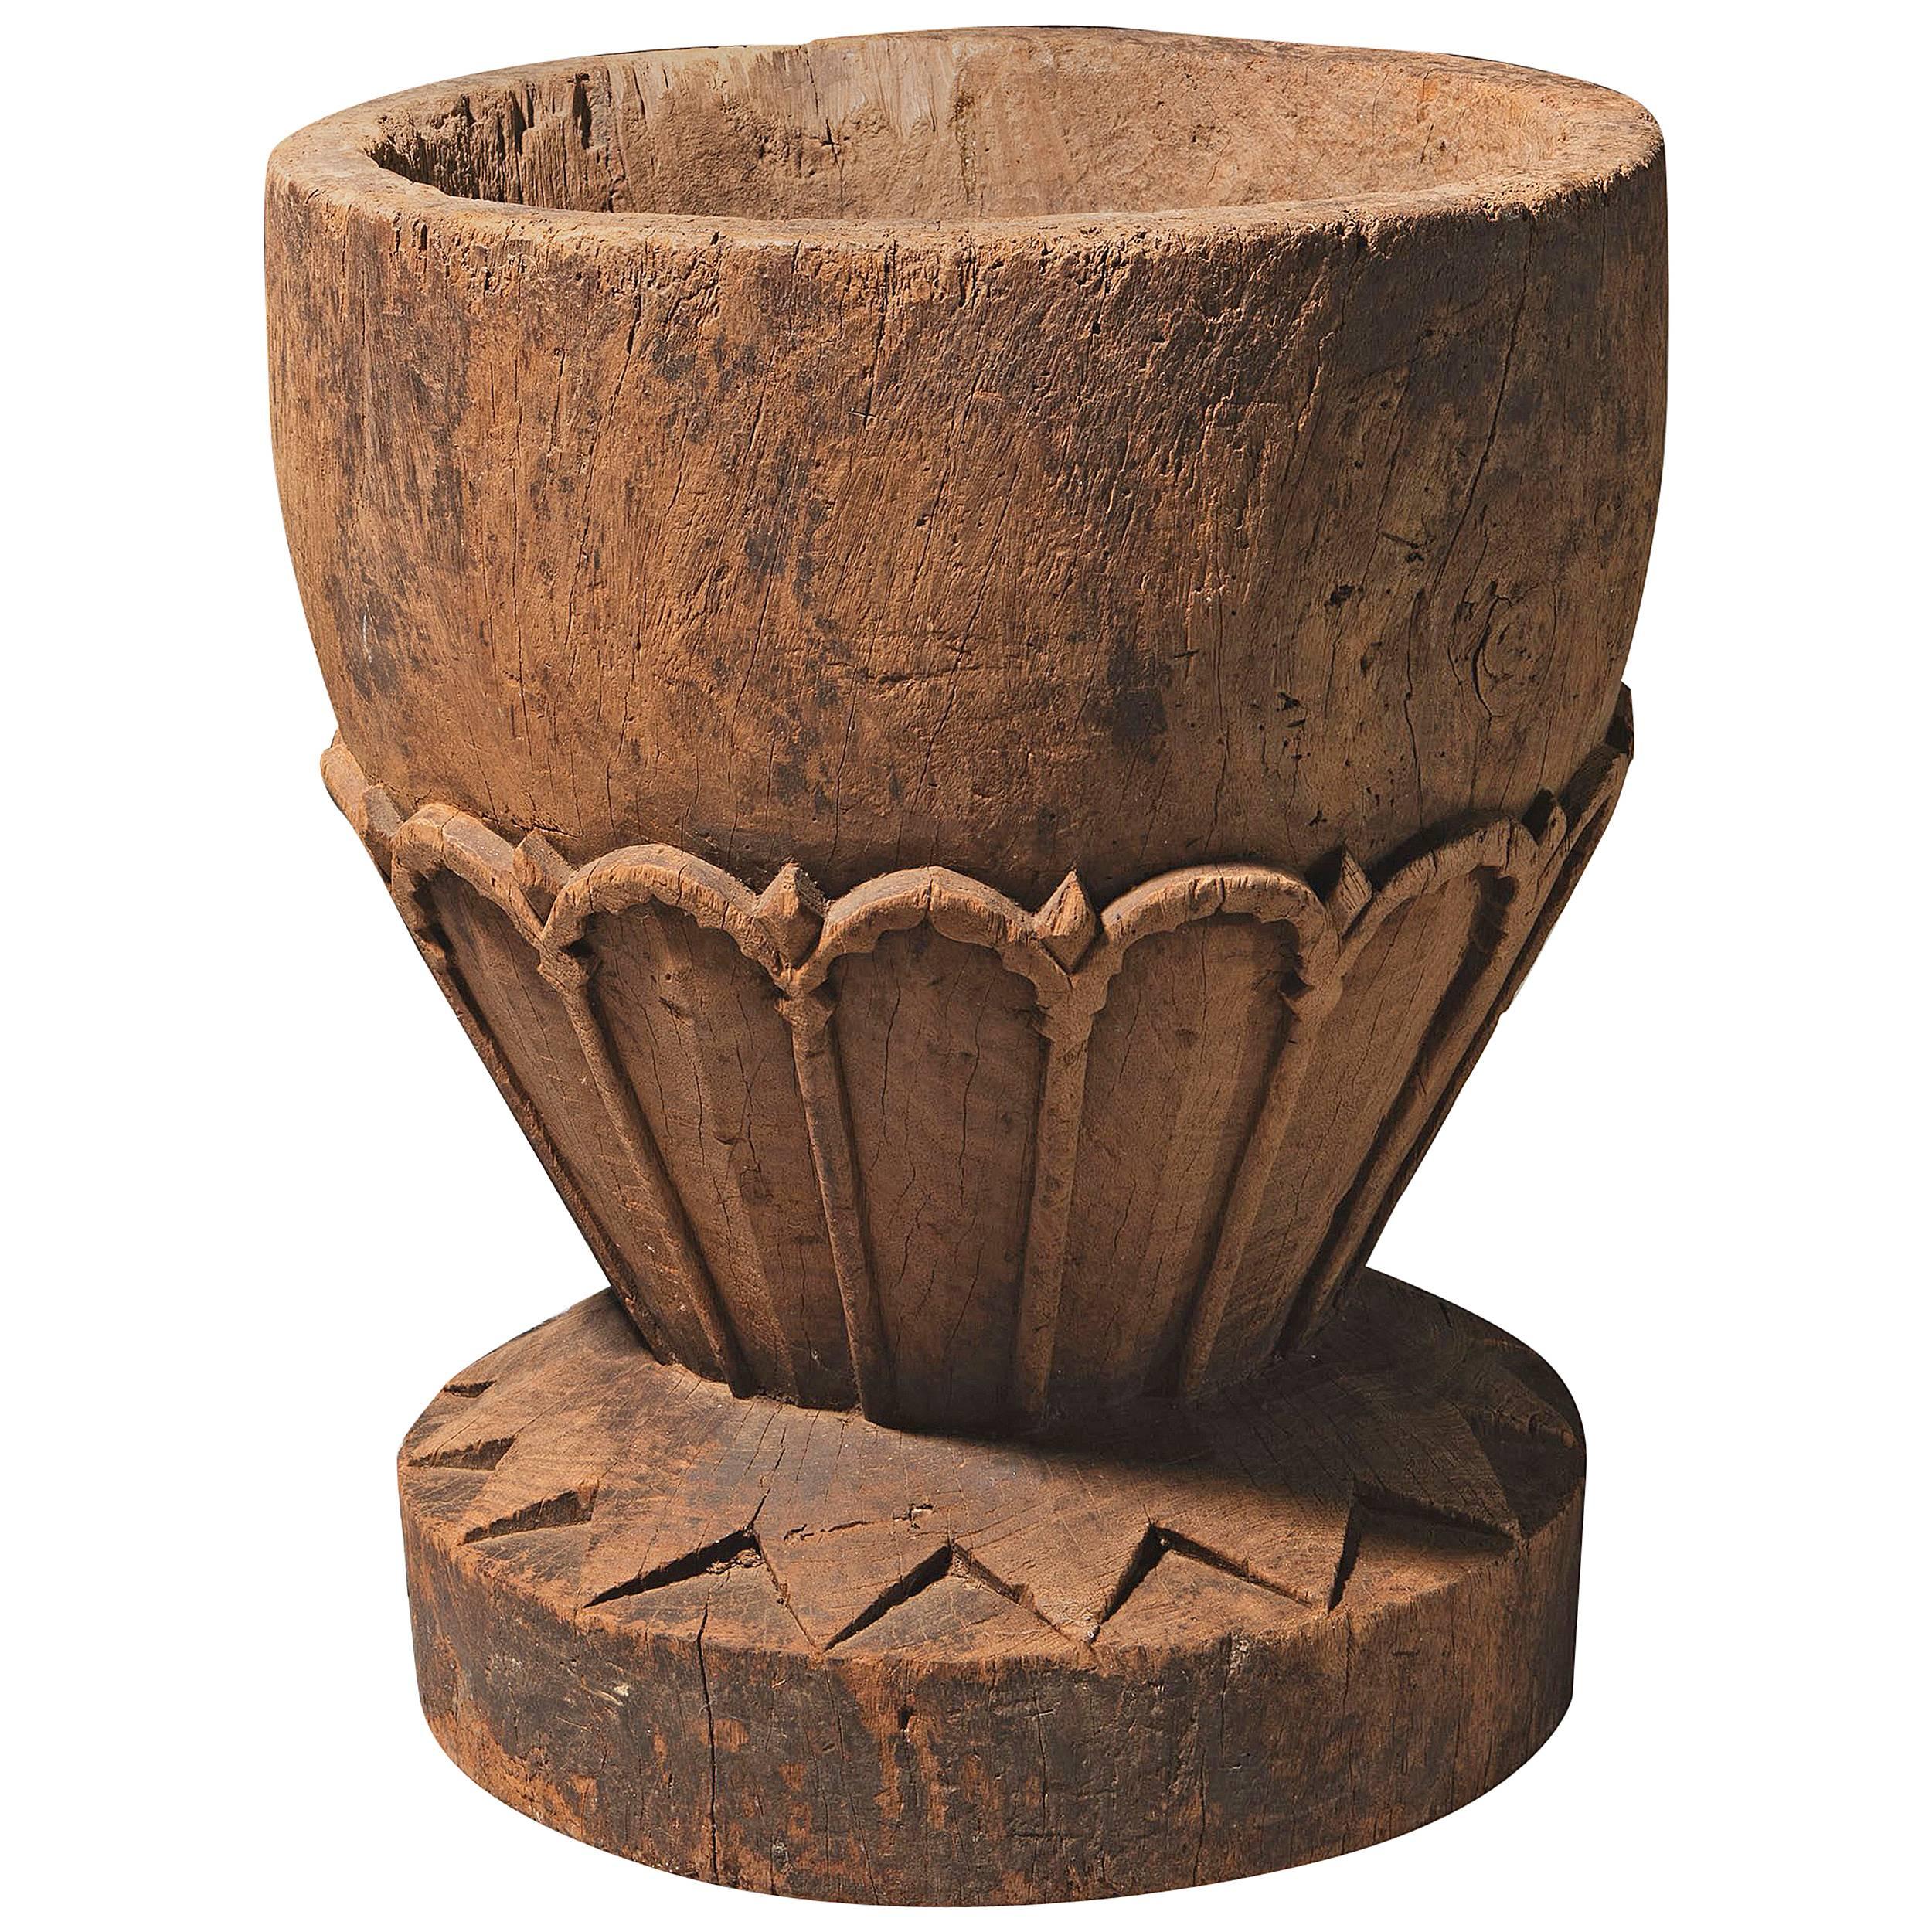 Large Scale Decorative Indian Wooden Mortar